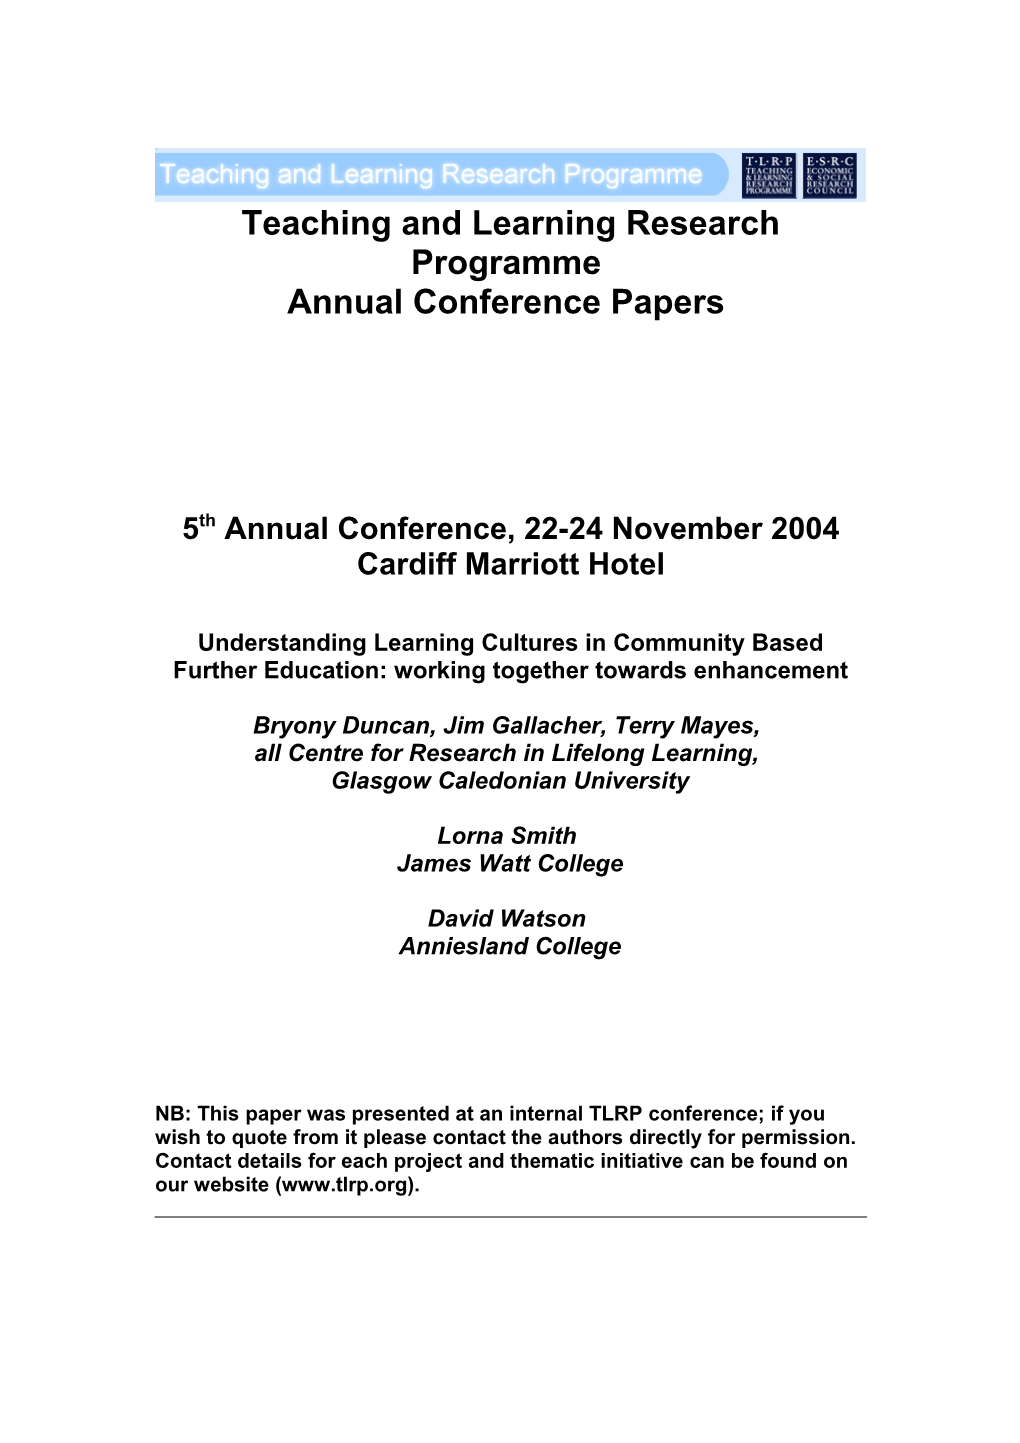 TLRP Conference Paper